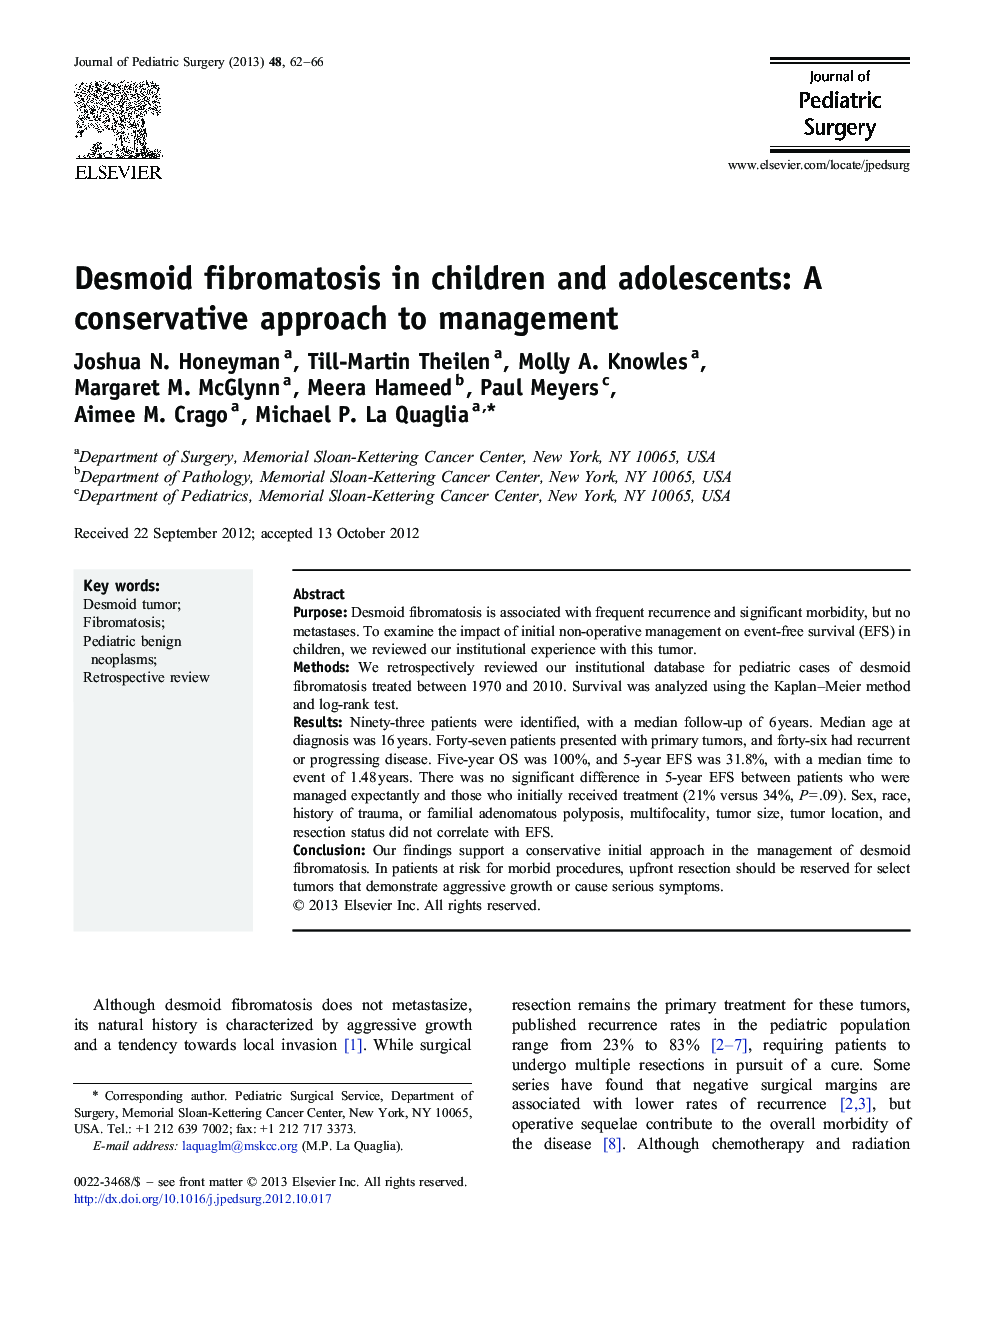 Desmoid fibromatosis in children and adolescents: A conservative approach to management